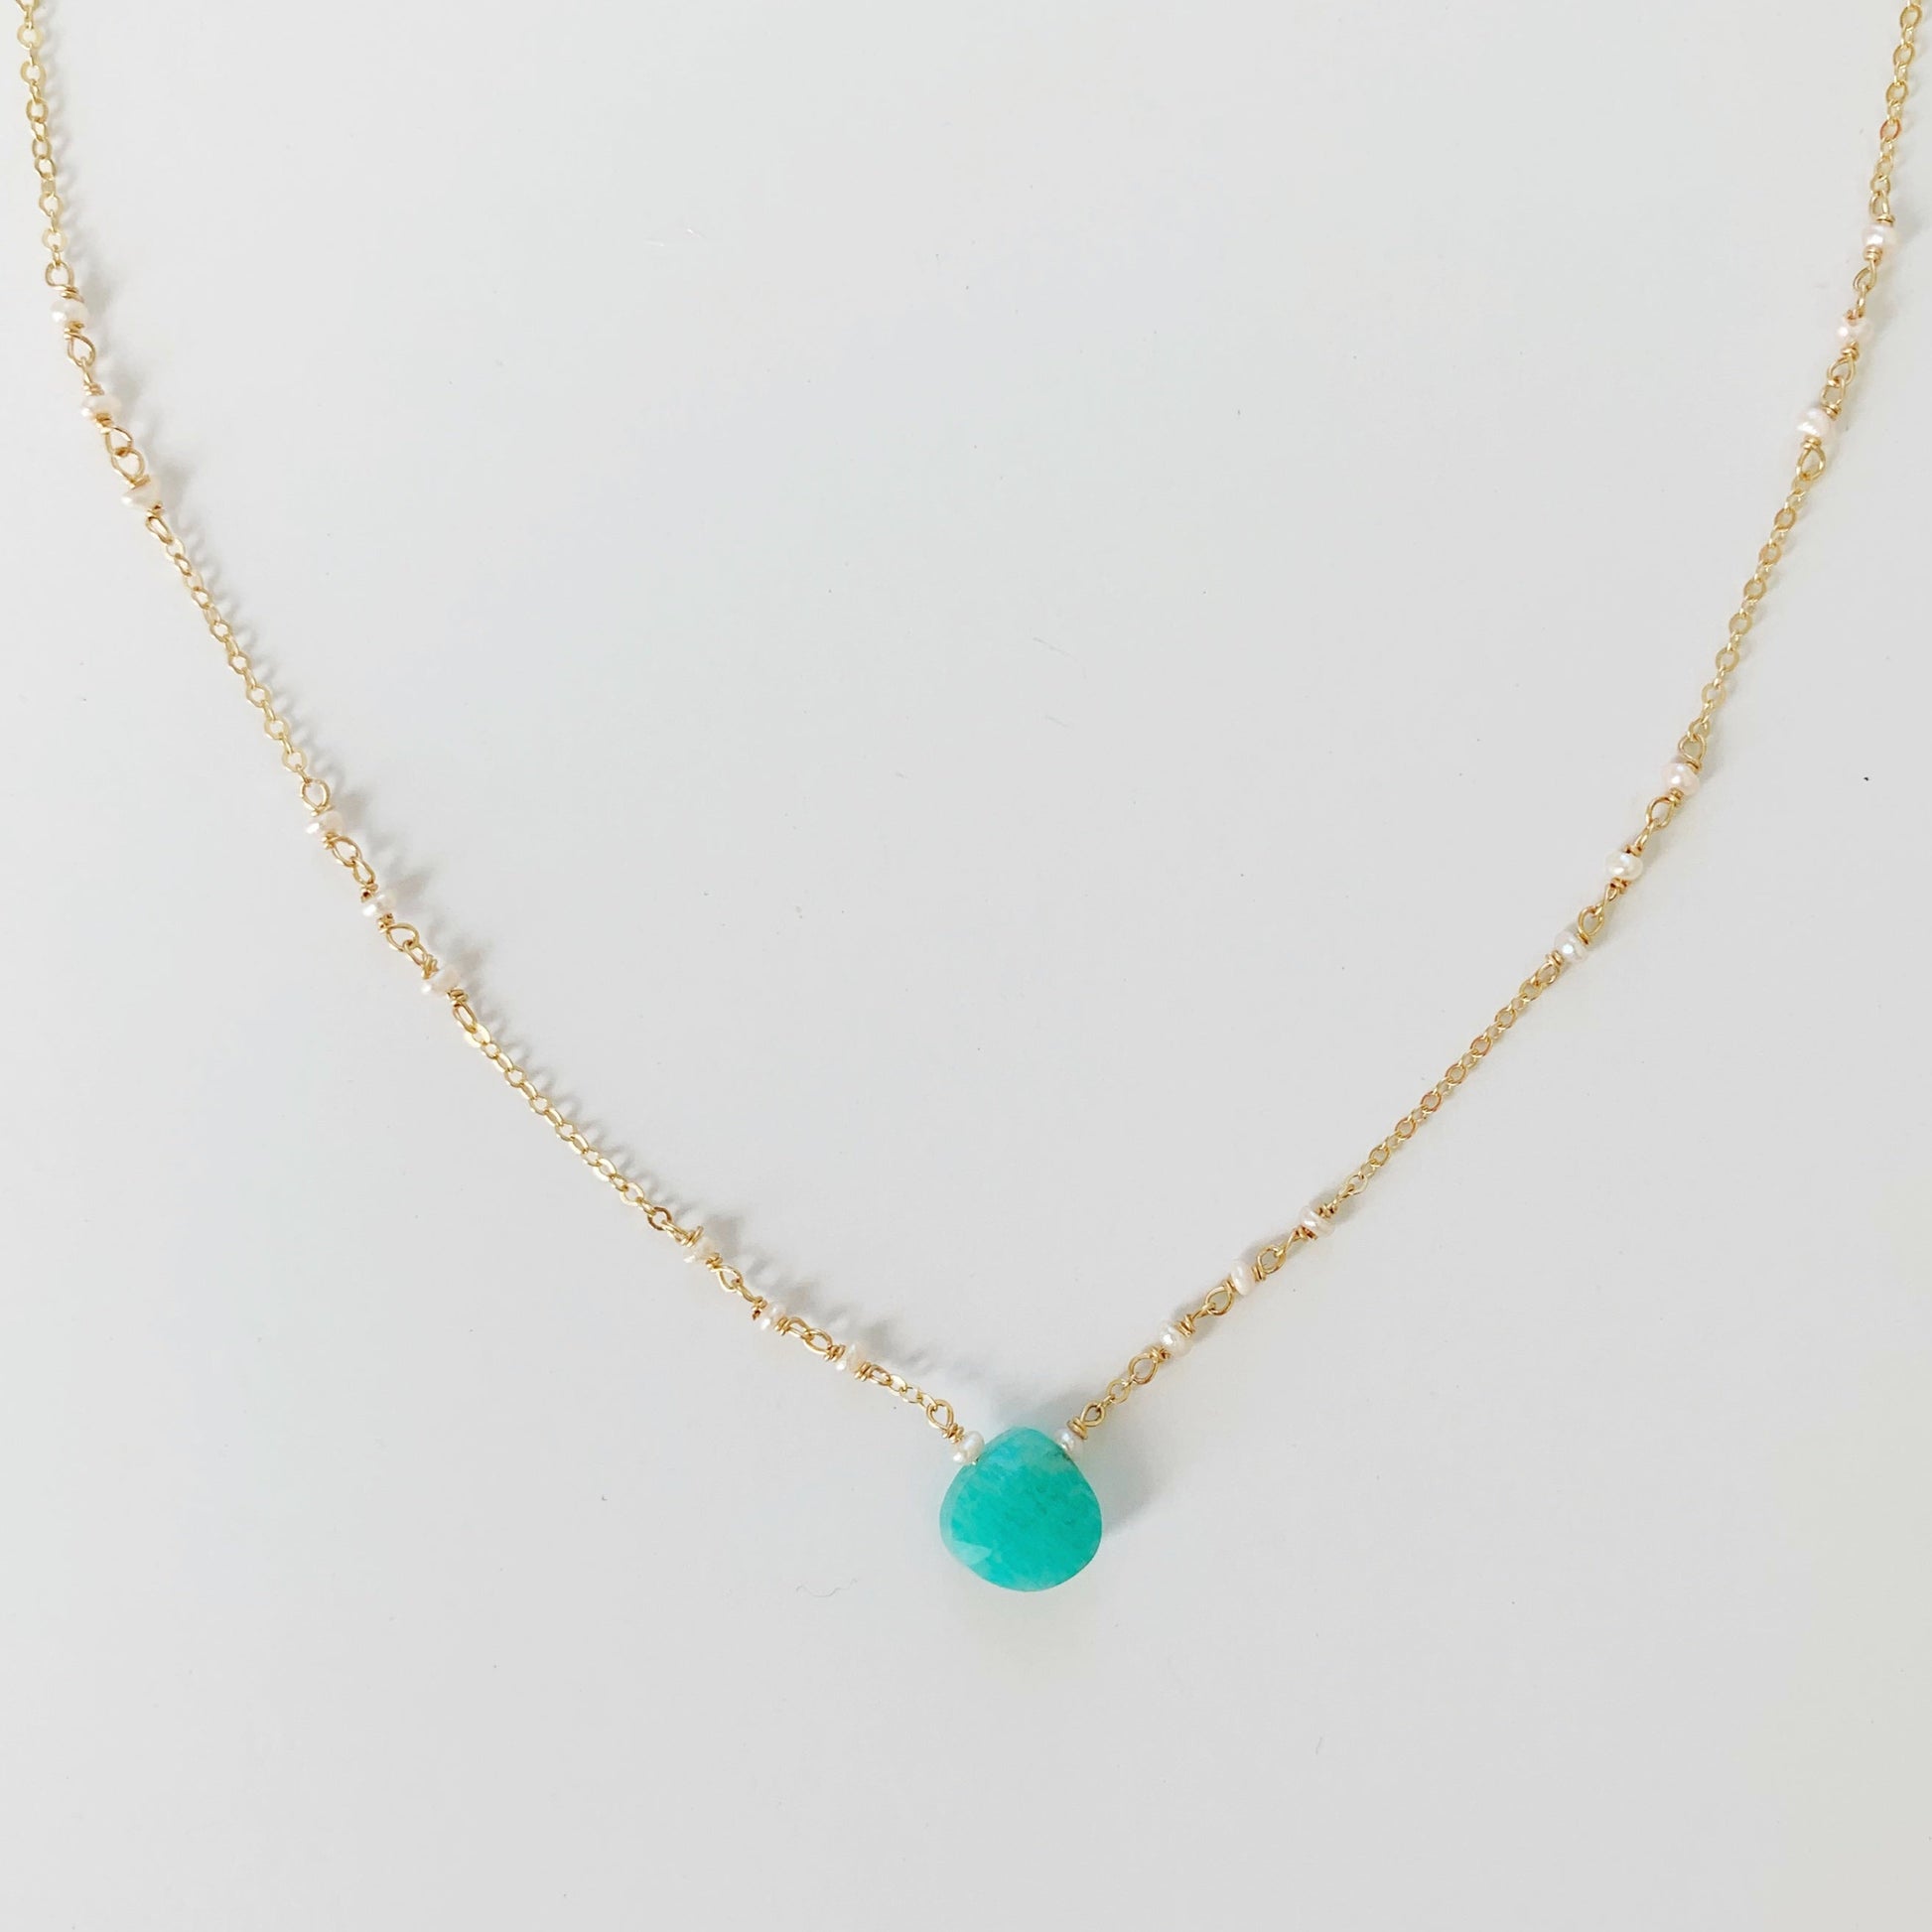 Island Air necklace by mermaids and madeleines is created with a bright amazonite game at the center and tiny freshwater pearls on 14k gold filled chain. This necklace is photographed on a white background